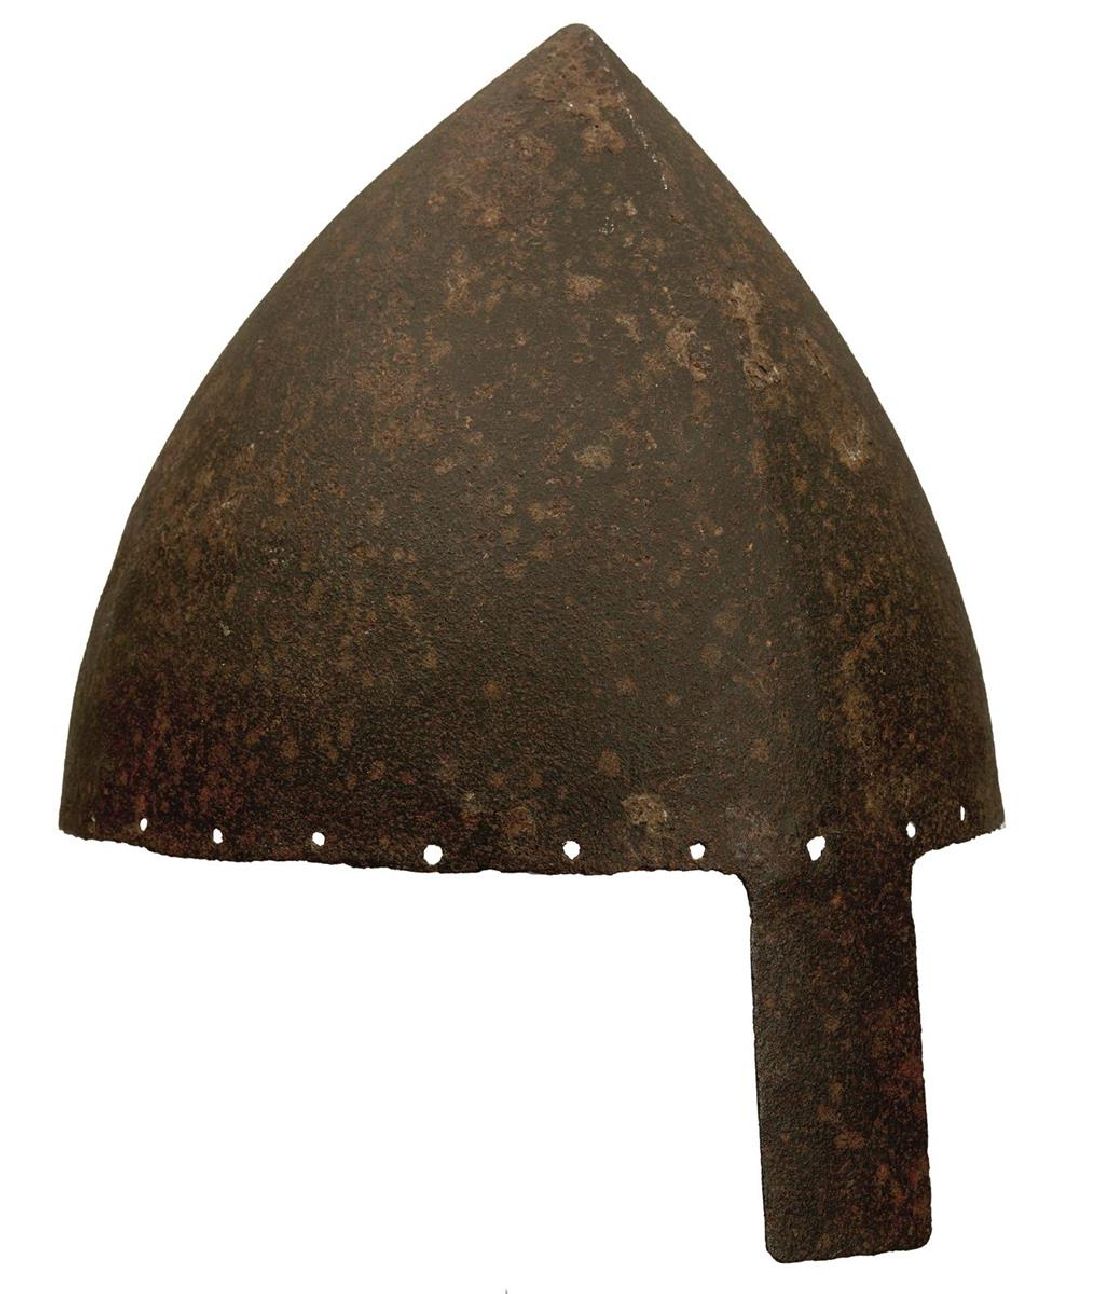 THE PROPERTY OF A GENTLEMAN: A 12TH CENTURY NORMAN NASAL BAR HELMET, the single piece skull drawn up